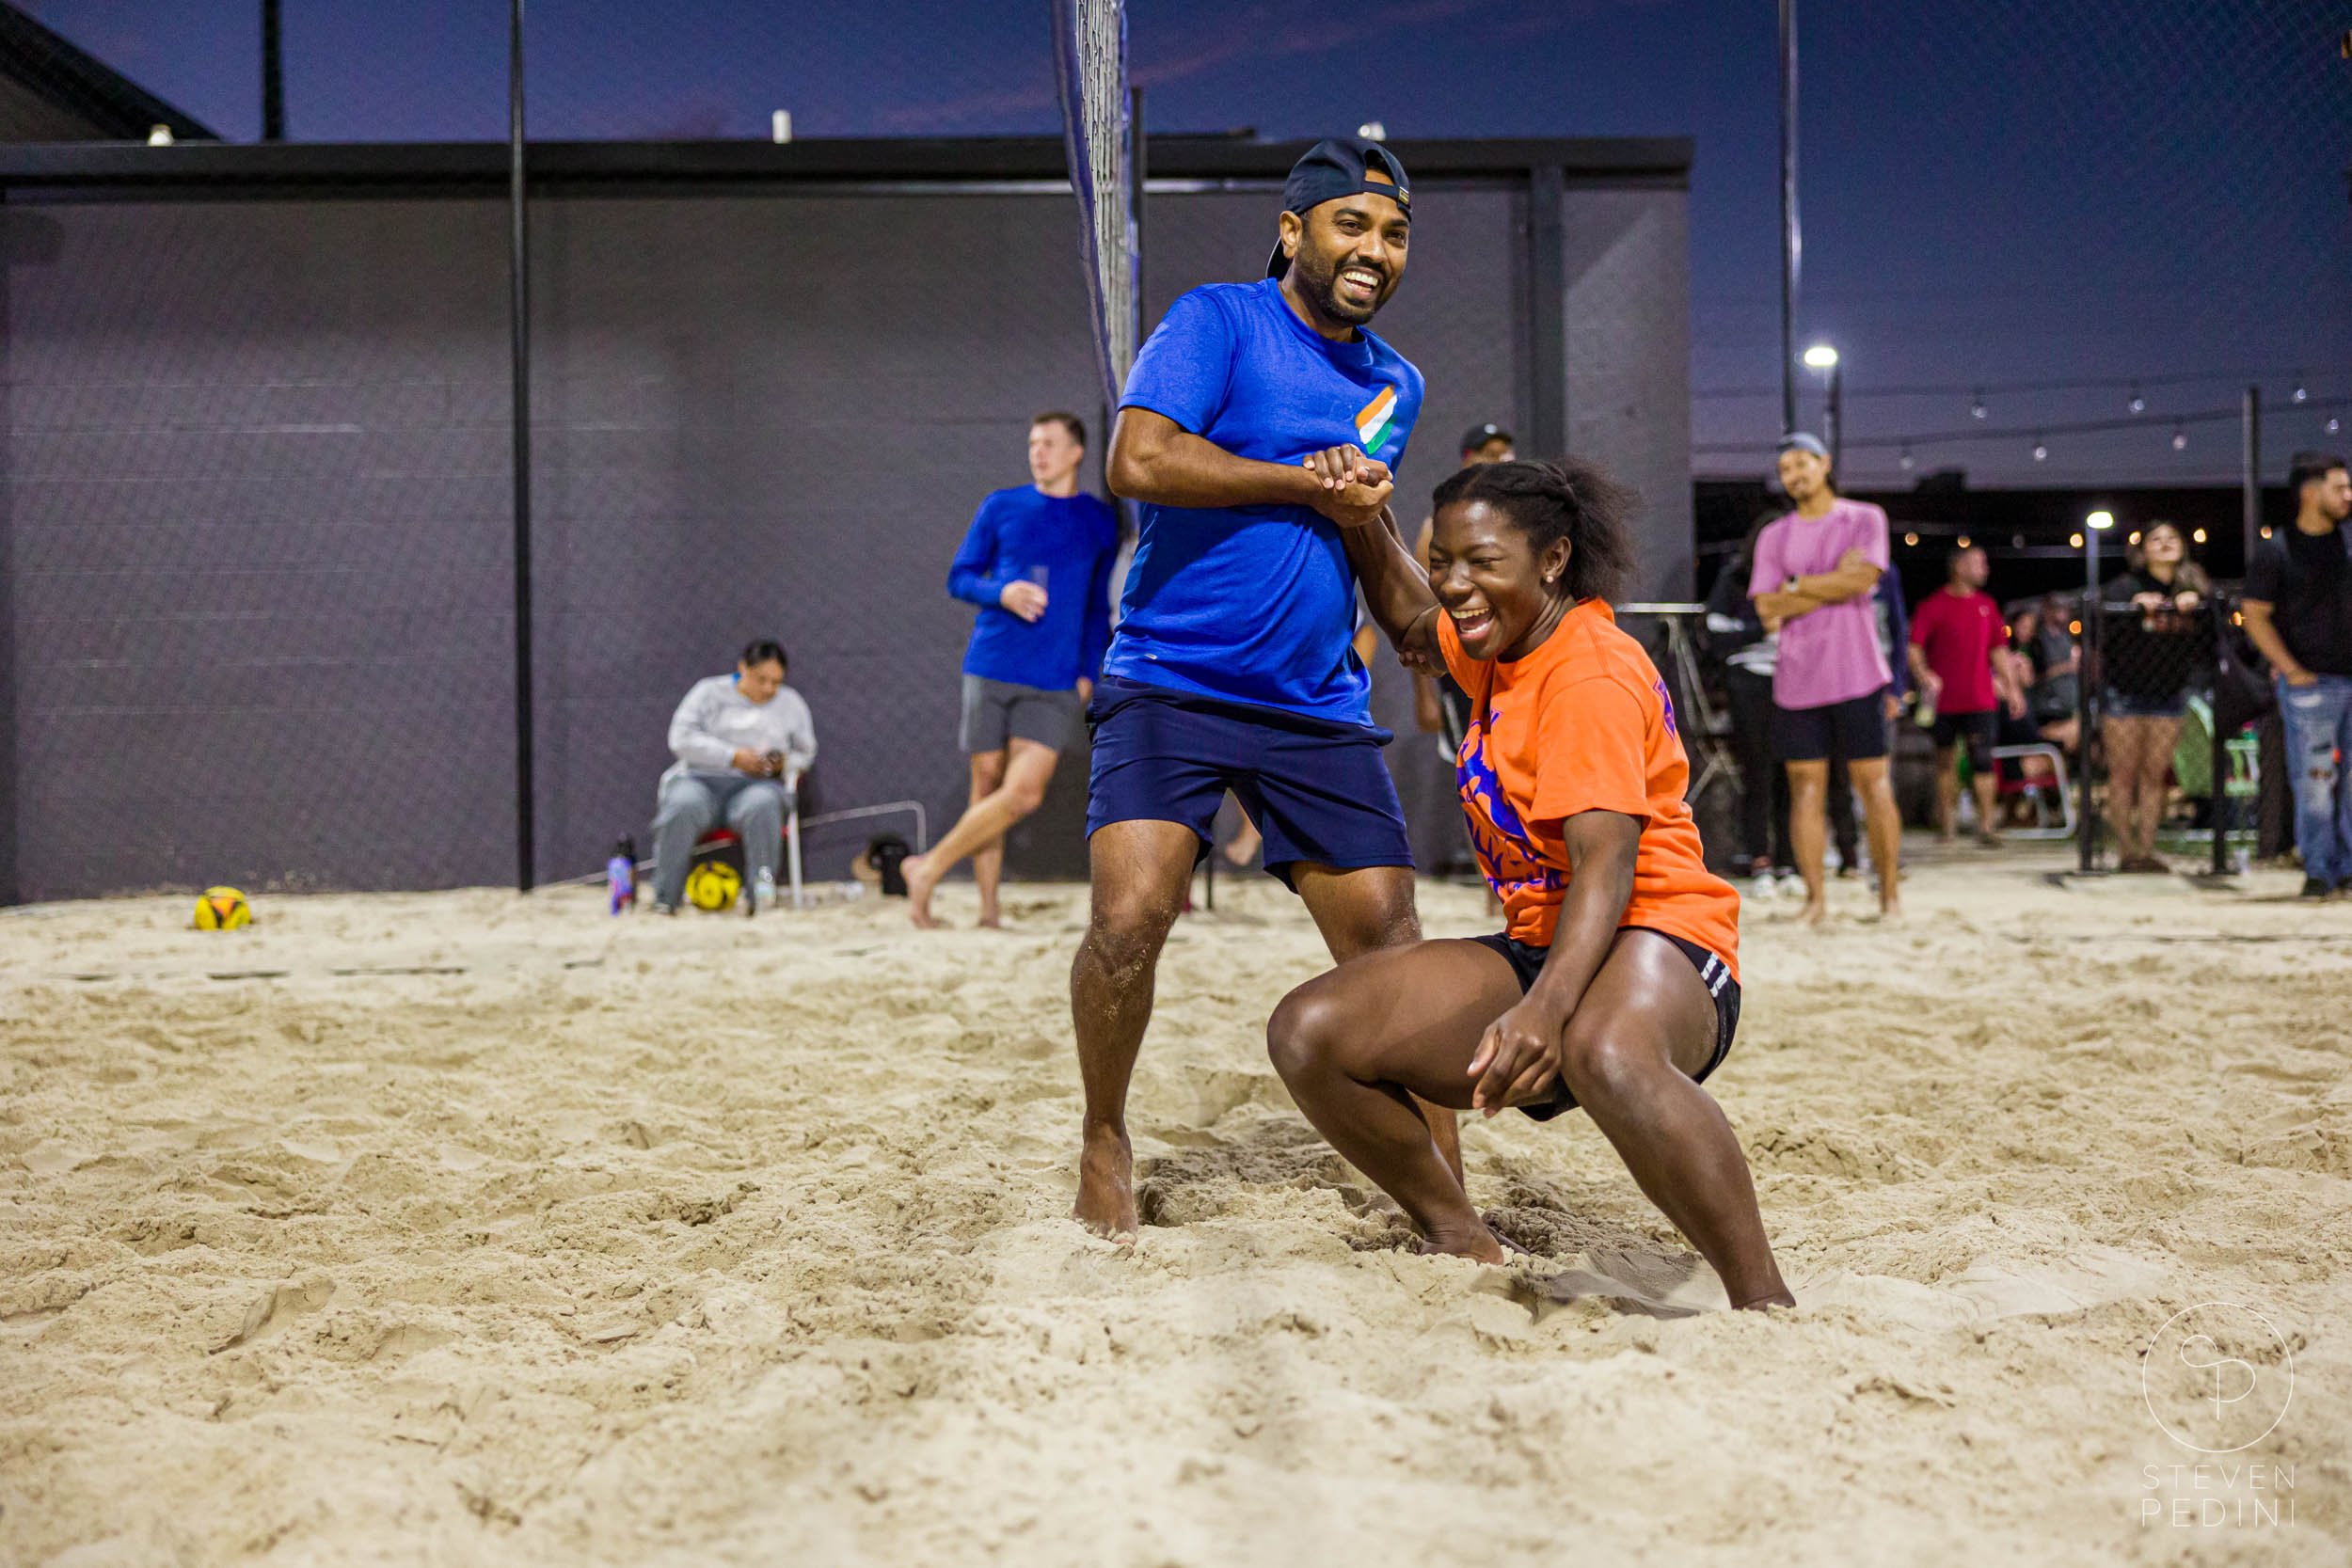 Steven Pedini Photography - Bumpy Pickle - Sand Volleyball - Houston TX - World Cup of Volleyball - 00344.jpg